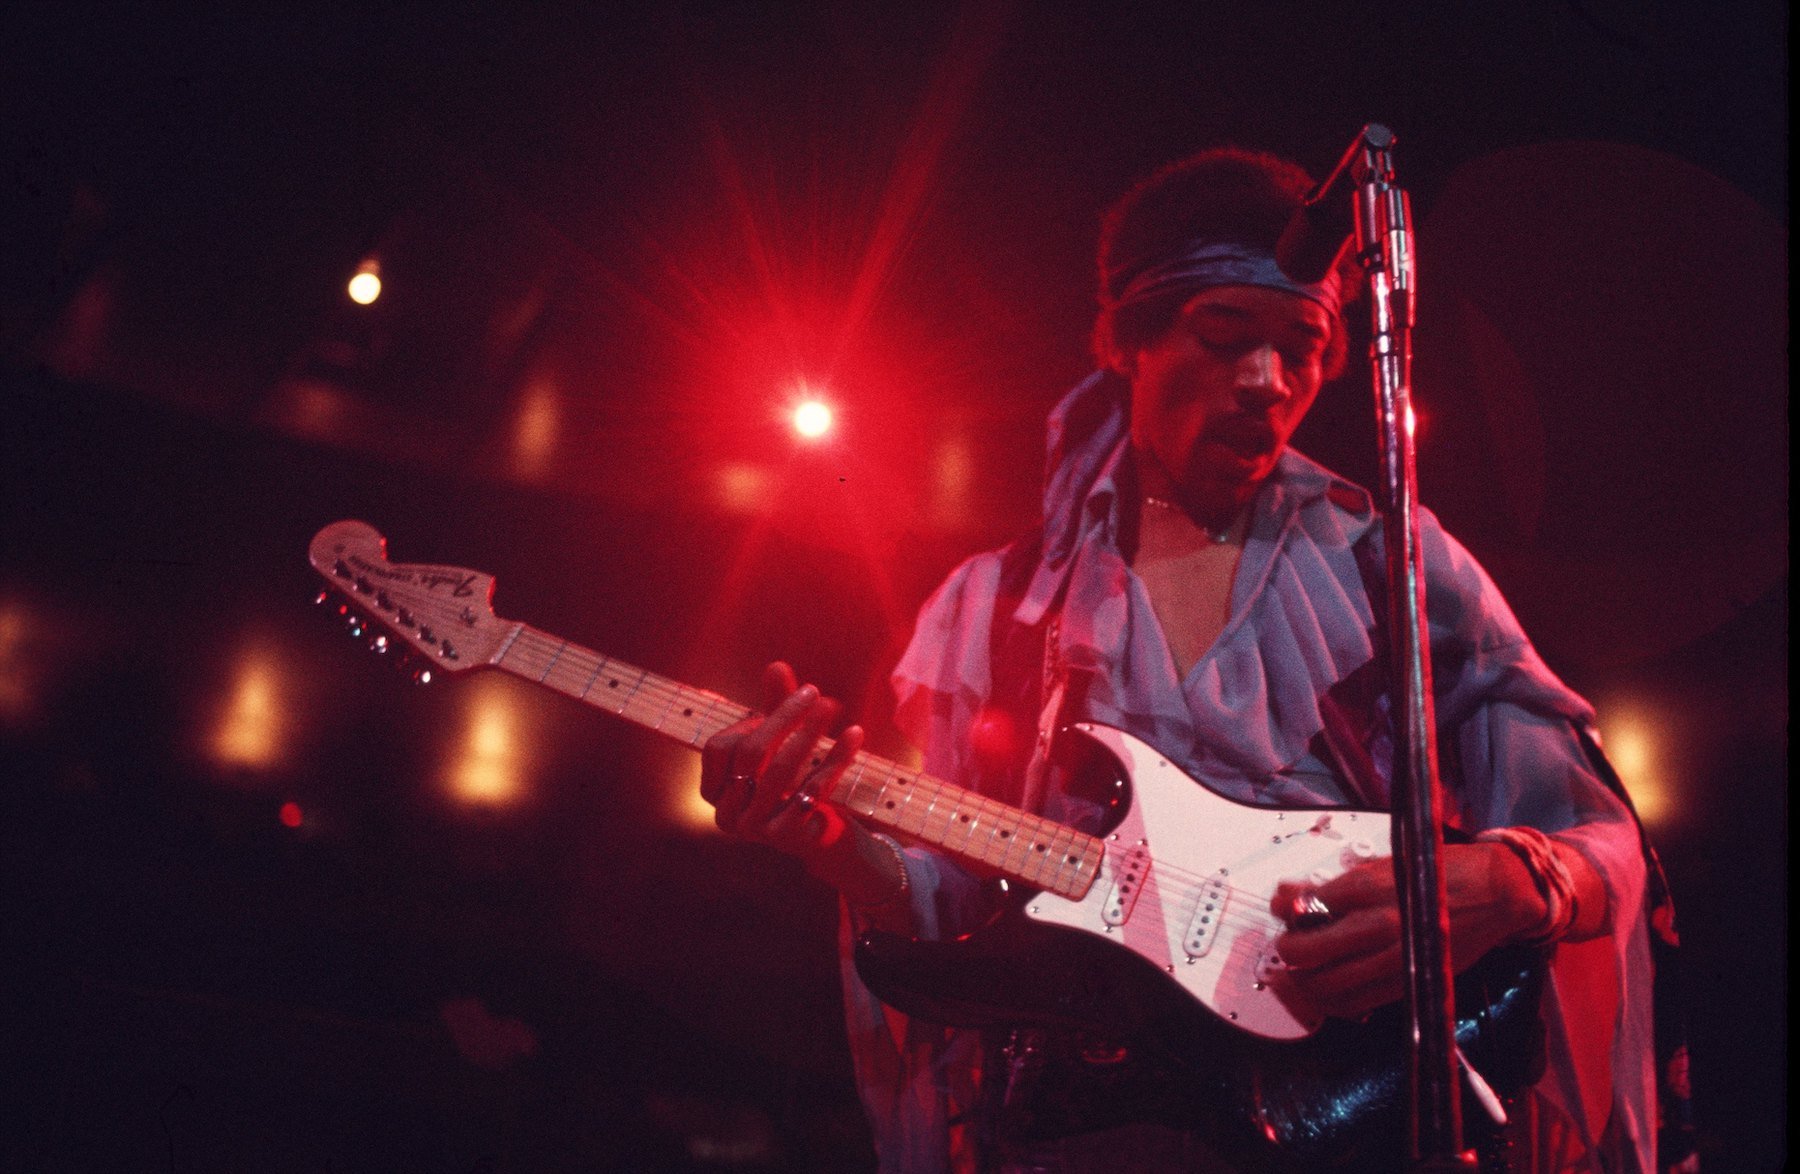 Jimi Hendrix, performer of 'Castles Made of Sand,' playing guitar on stage